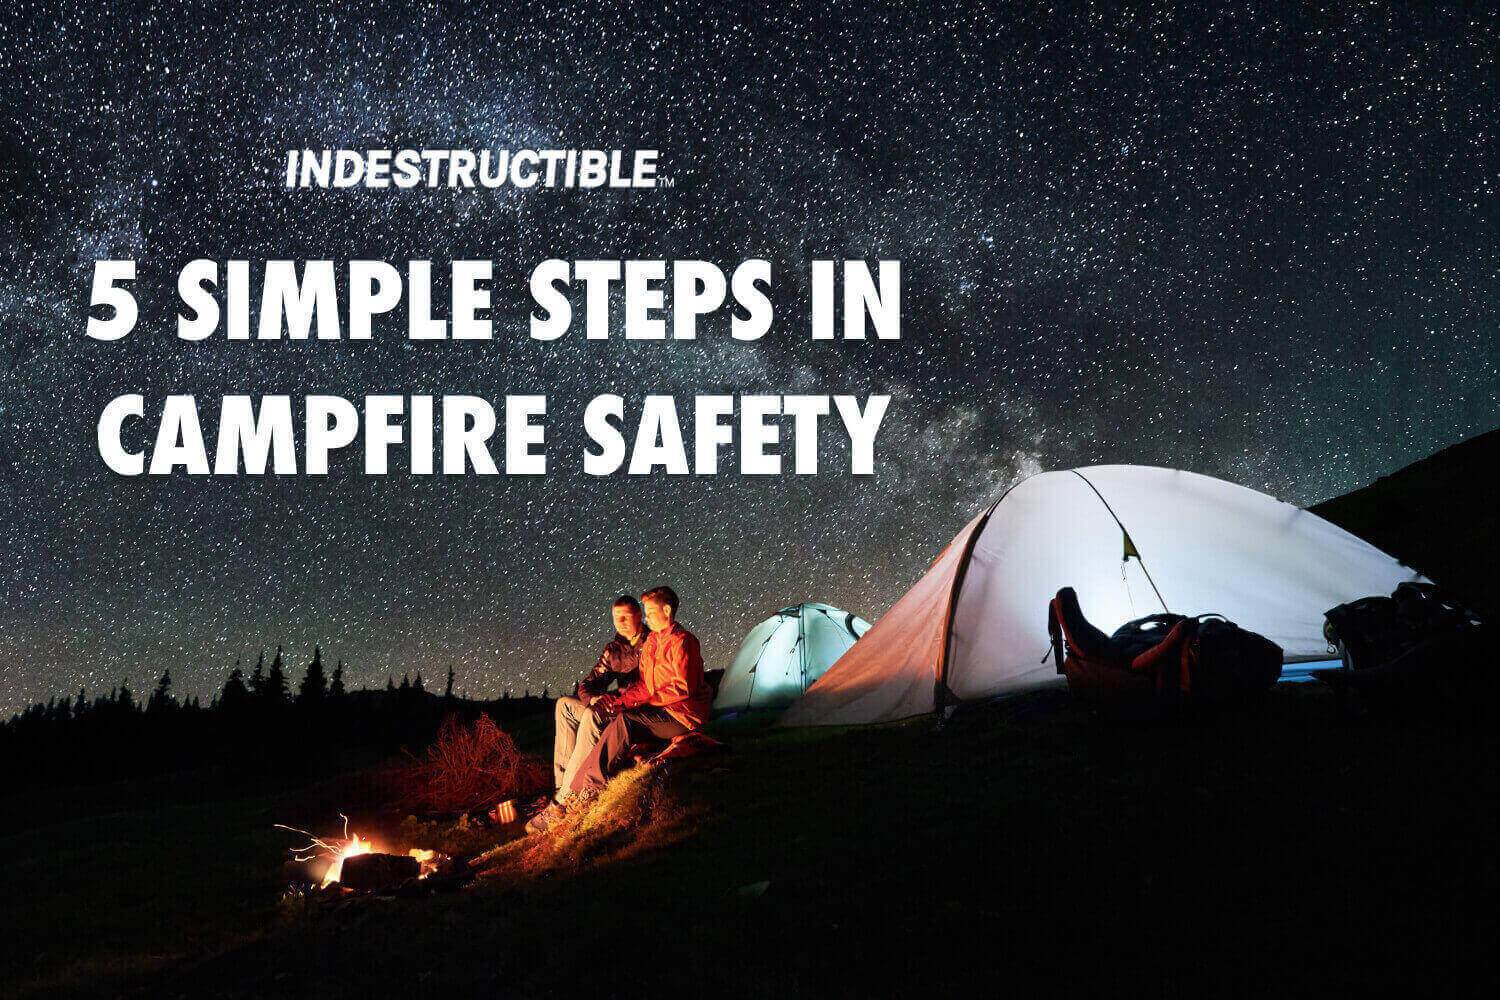 5 Simple Steps to Campfire Safety